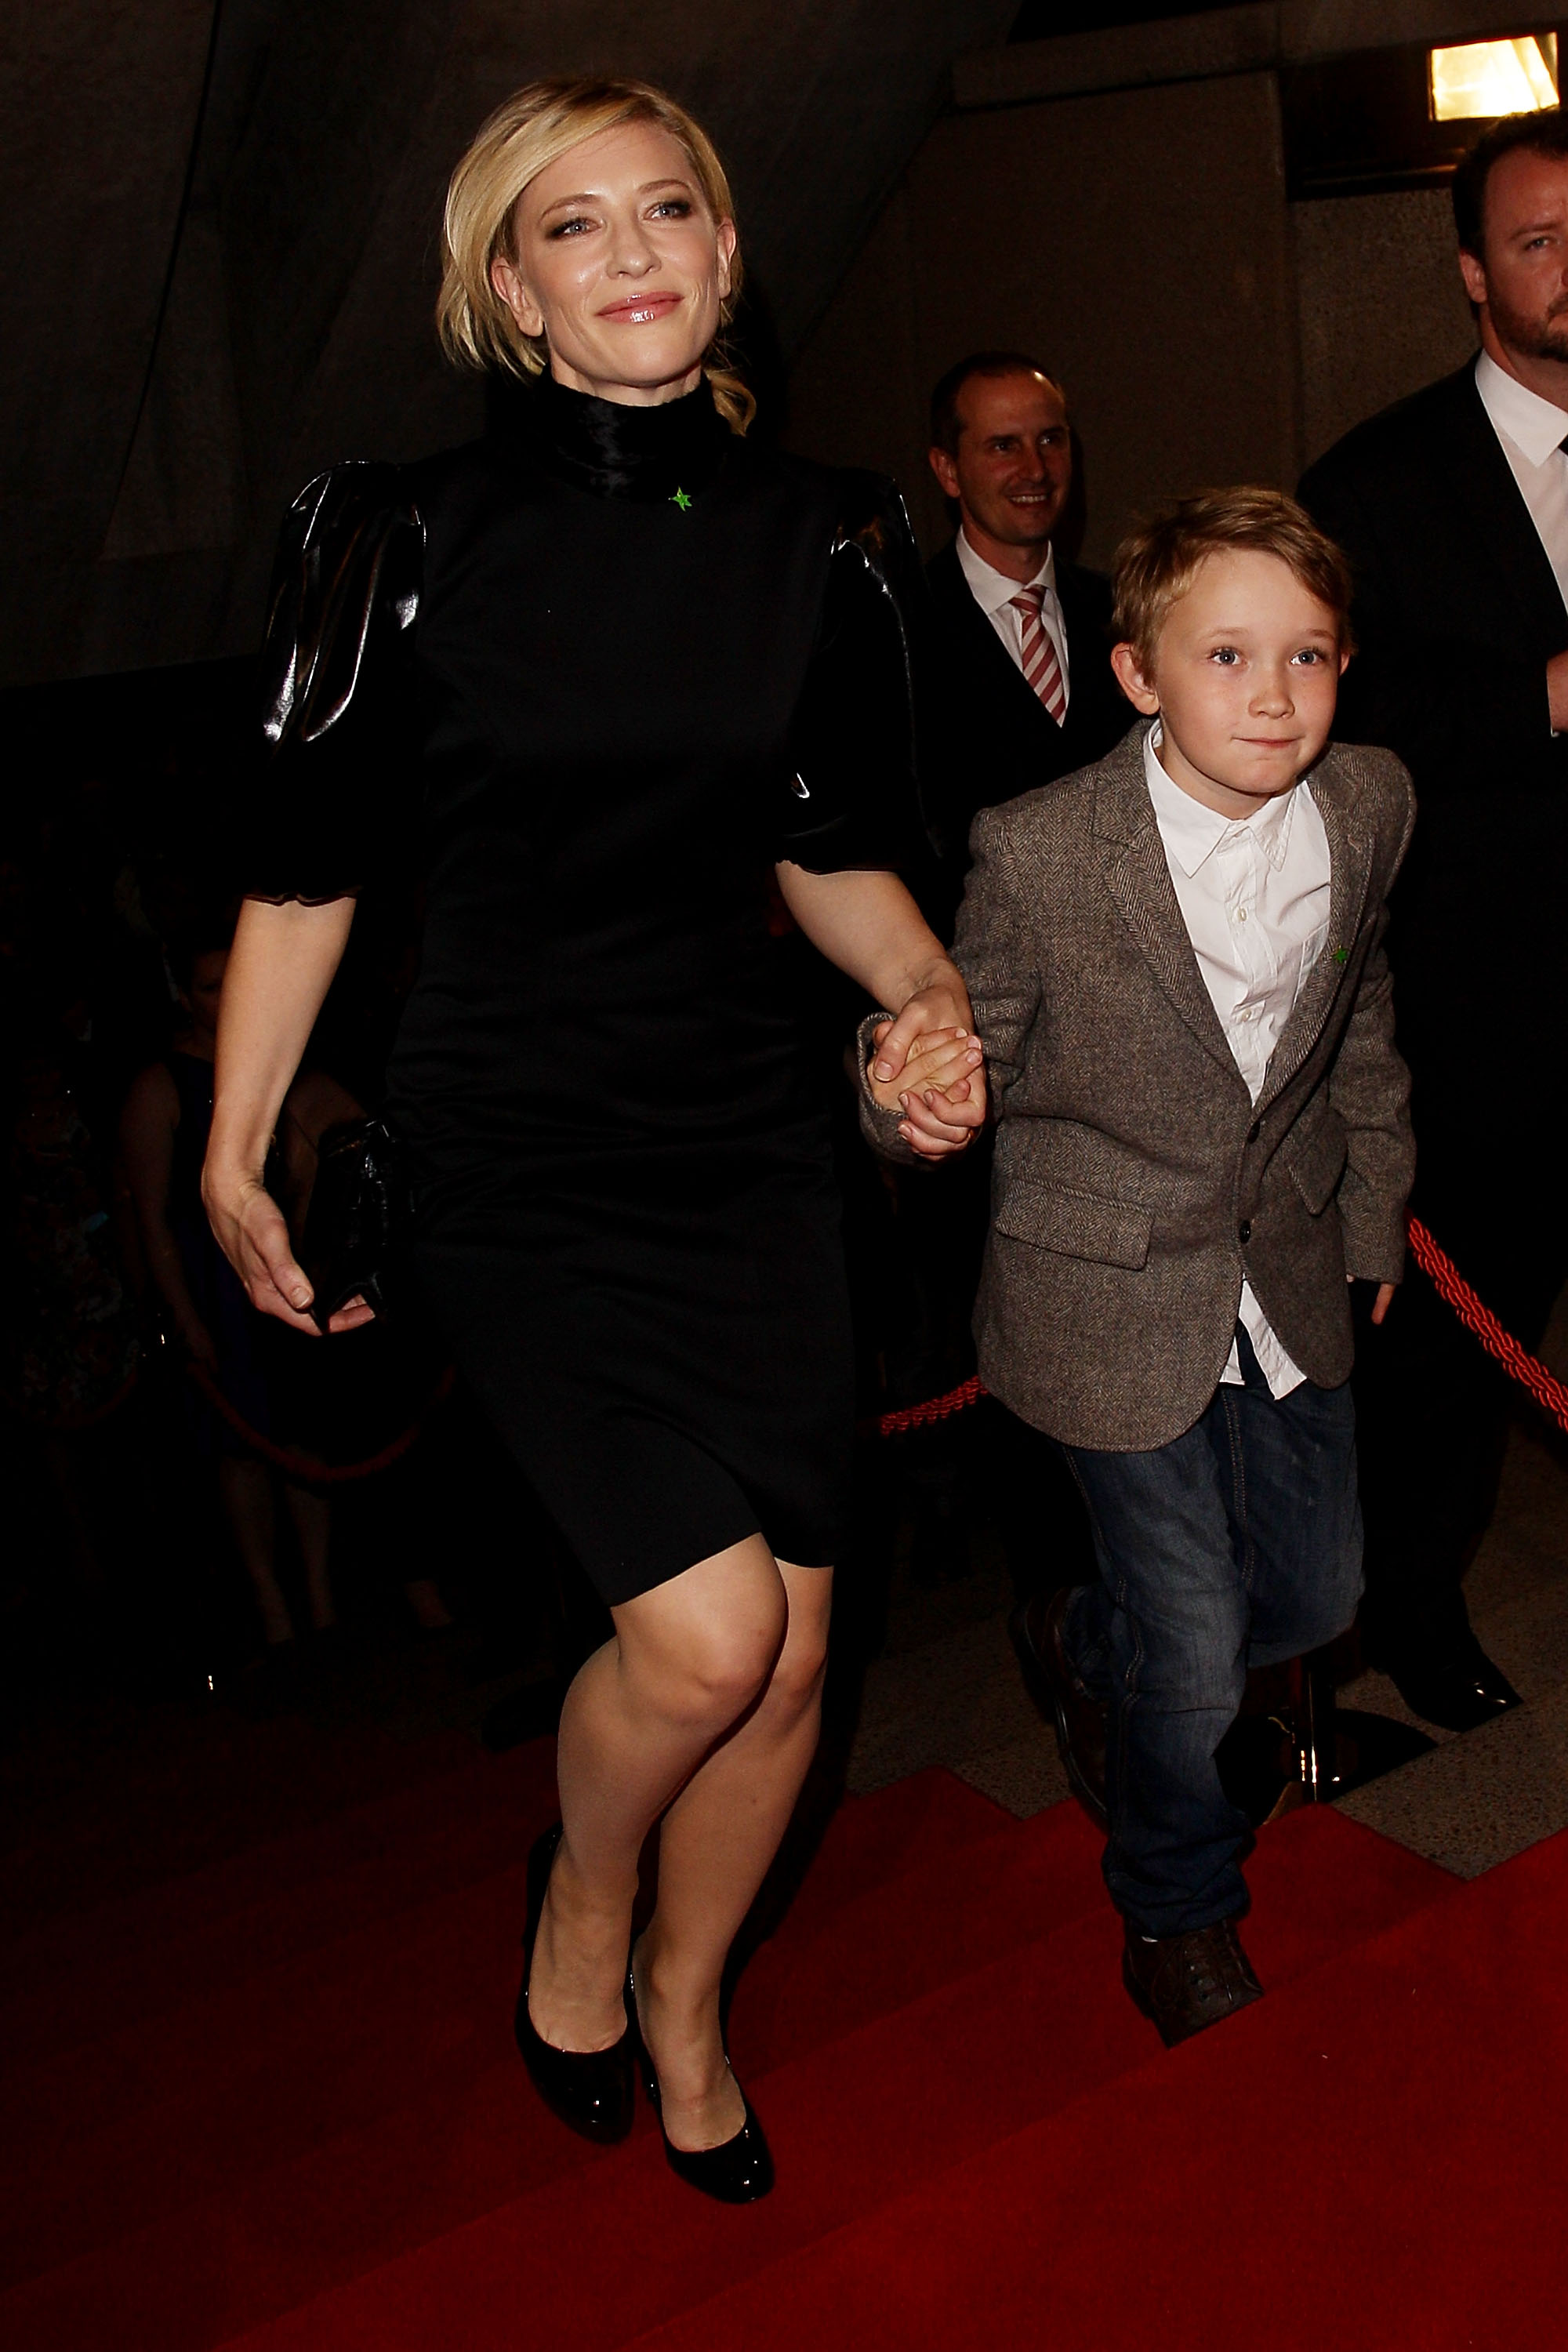 Cate Blanchett and her son Roman Upton at the Helpmann Awards on September 24, 2012, in Sydney, Australia | Source: Getty Images